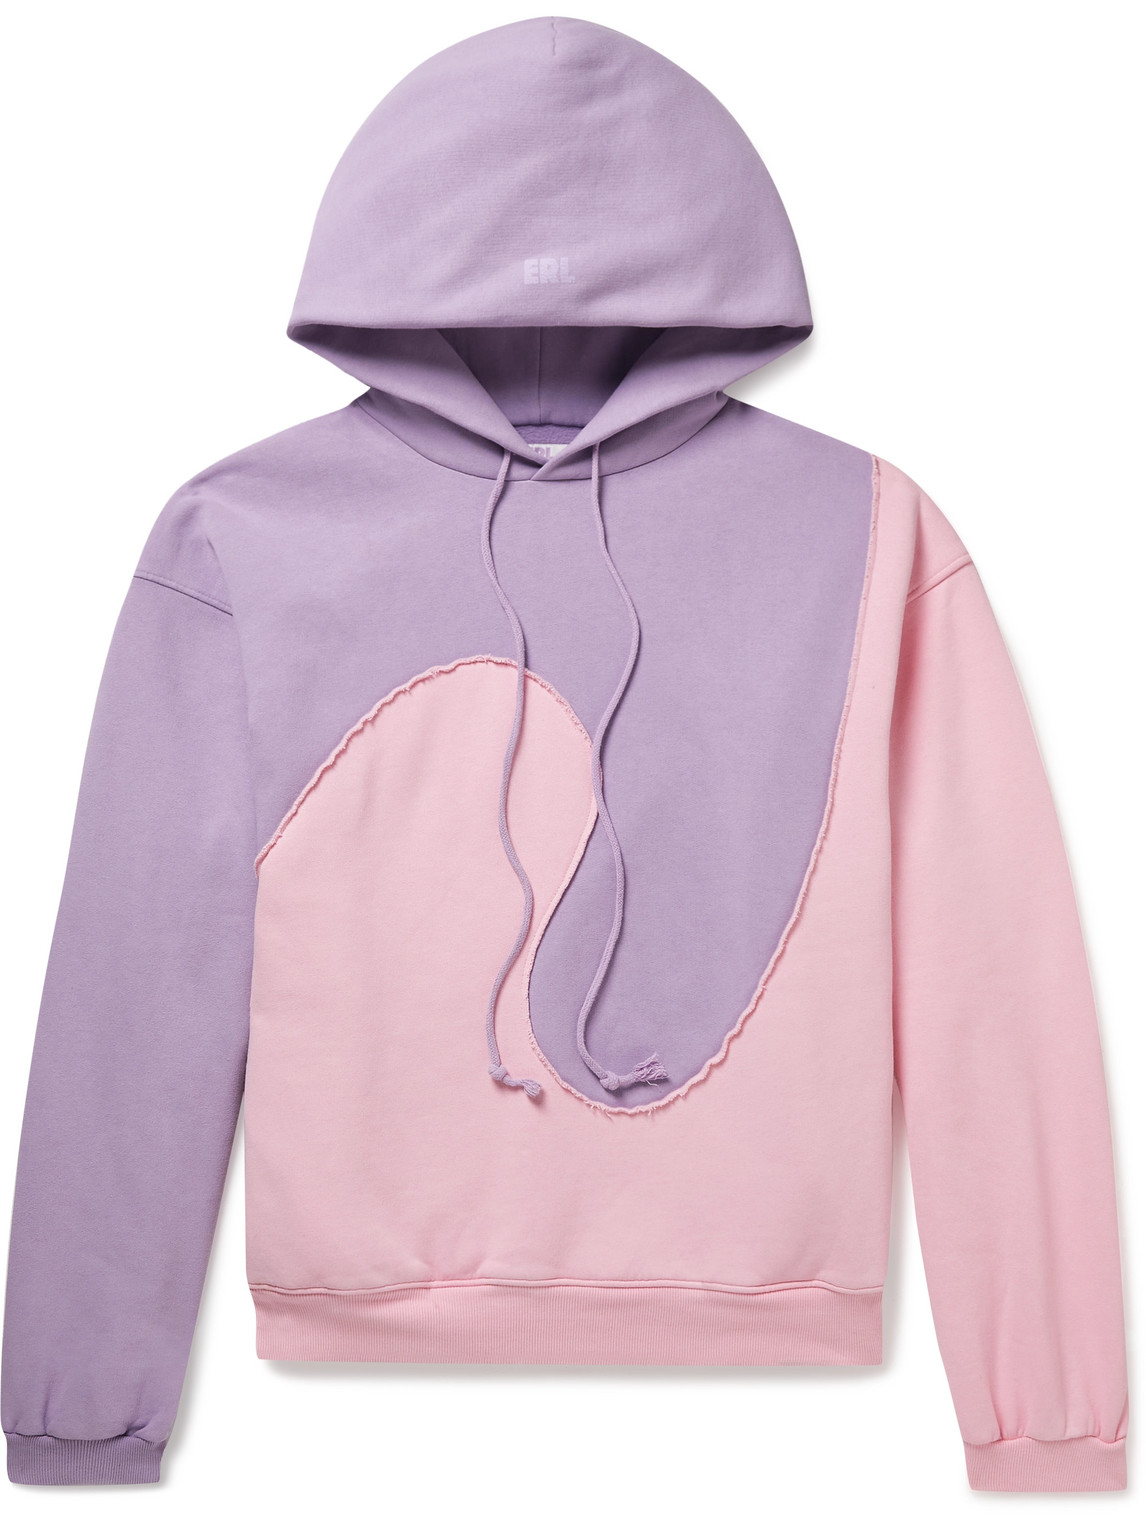 ERL Oversized Panelled Cotton-Blend Jersey Hoodie